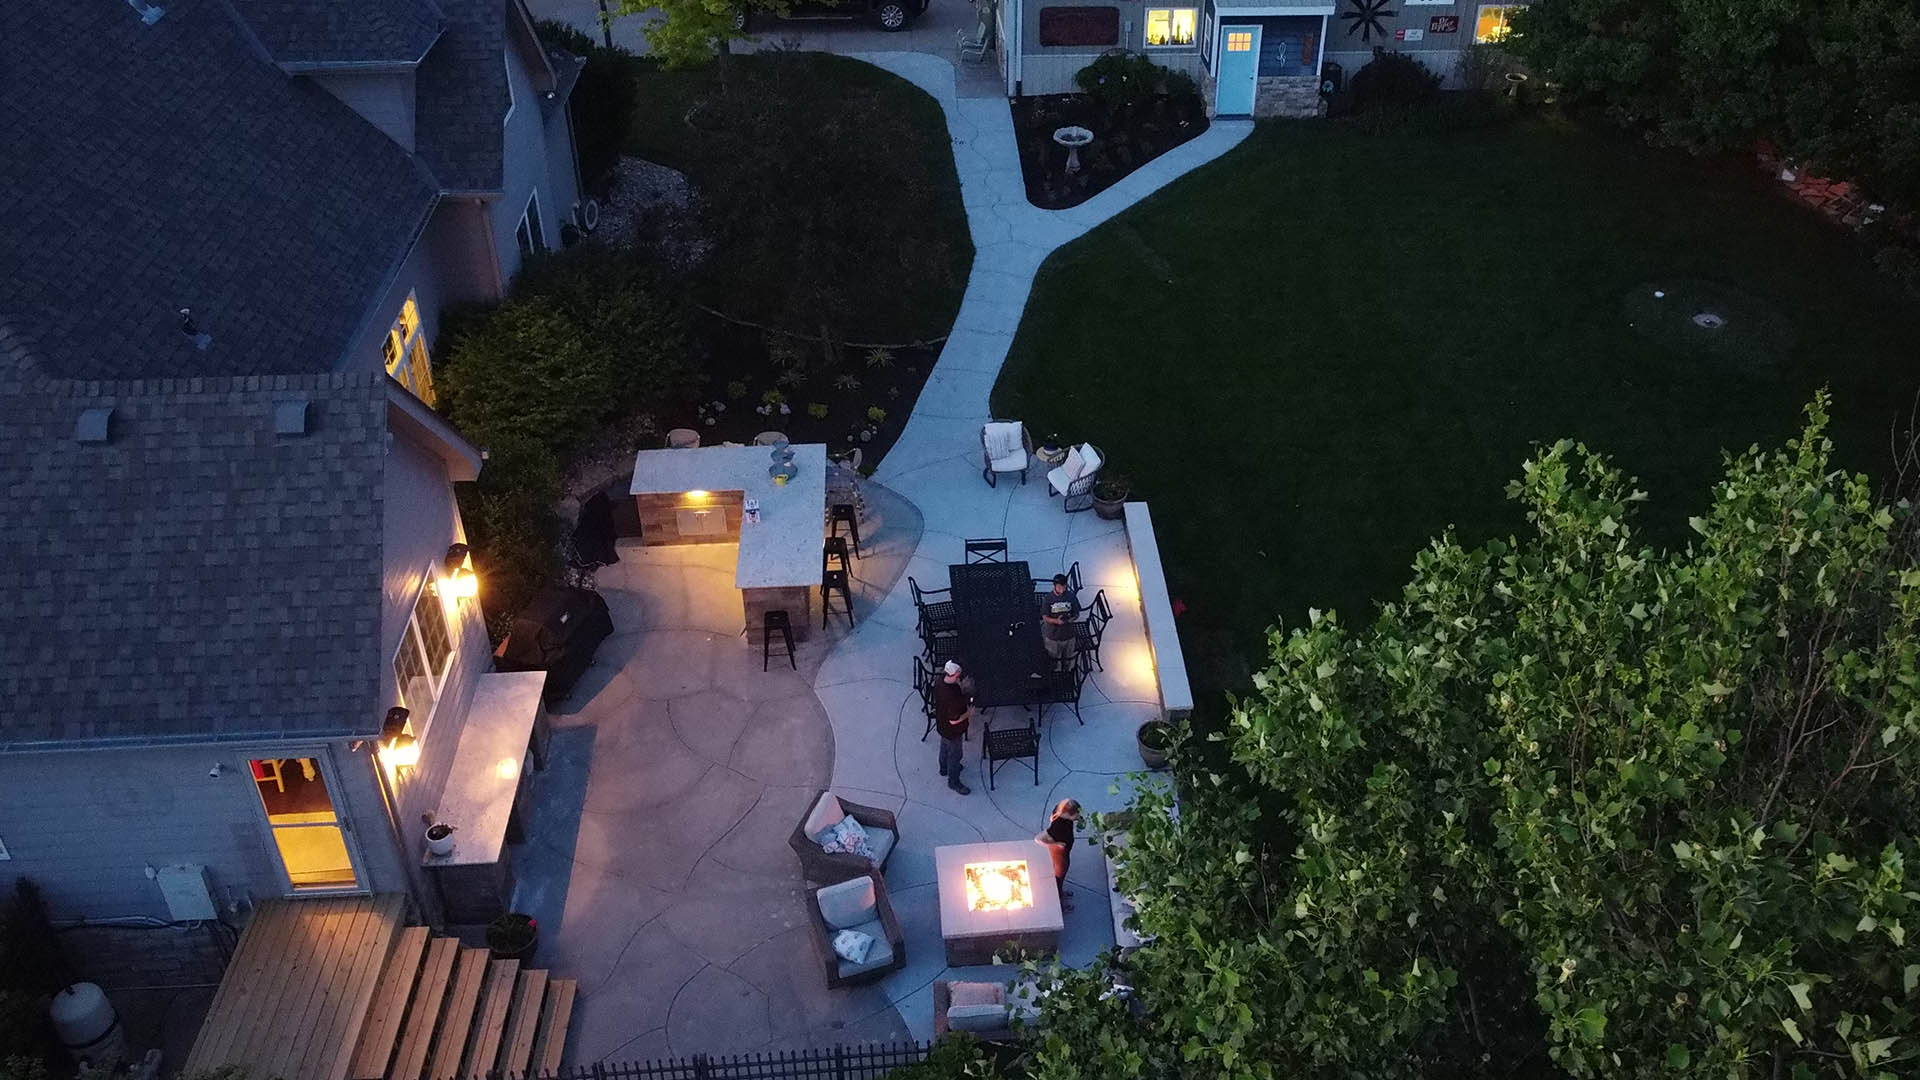 concrete patio with fire pit and retaining walls at night